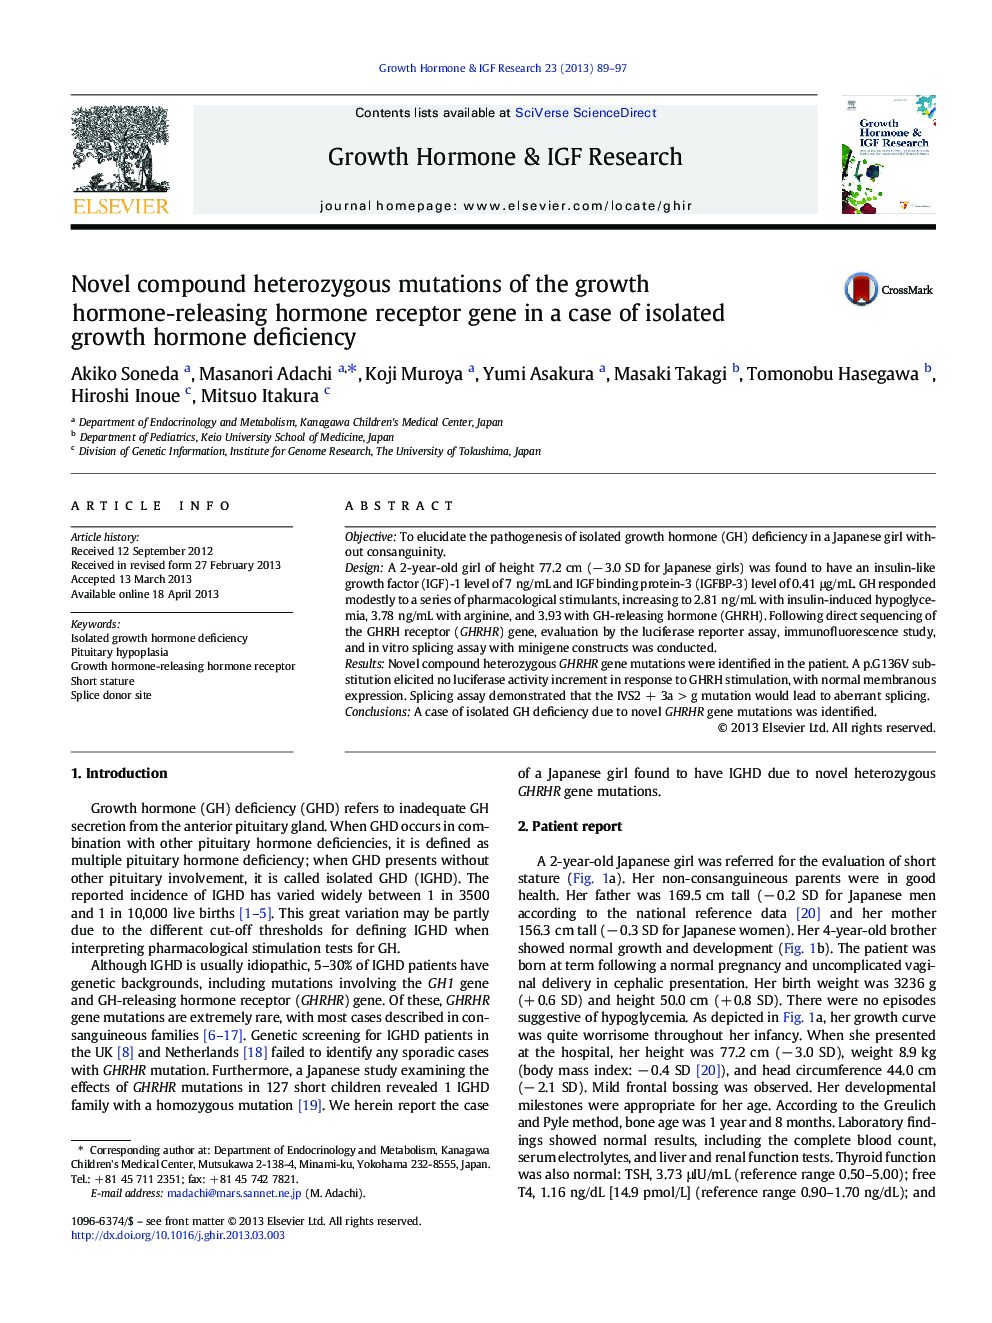 Novel compound heterozygous mutations of the growth hormone-releasing hormone receptor gene in a case of isolated growth hormone deficiency